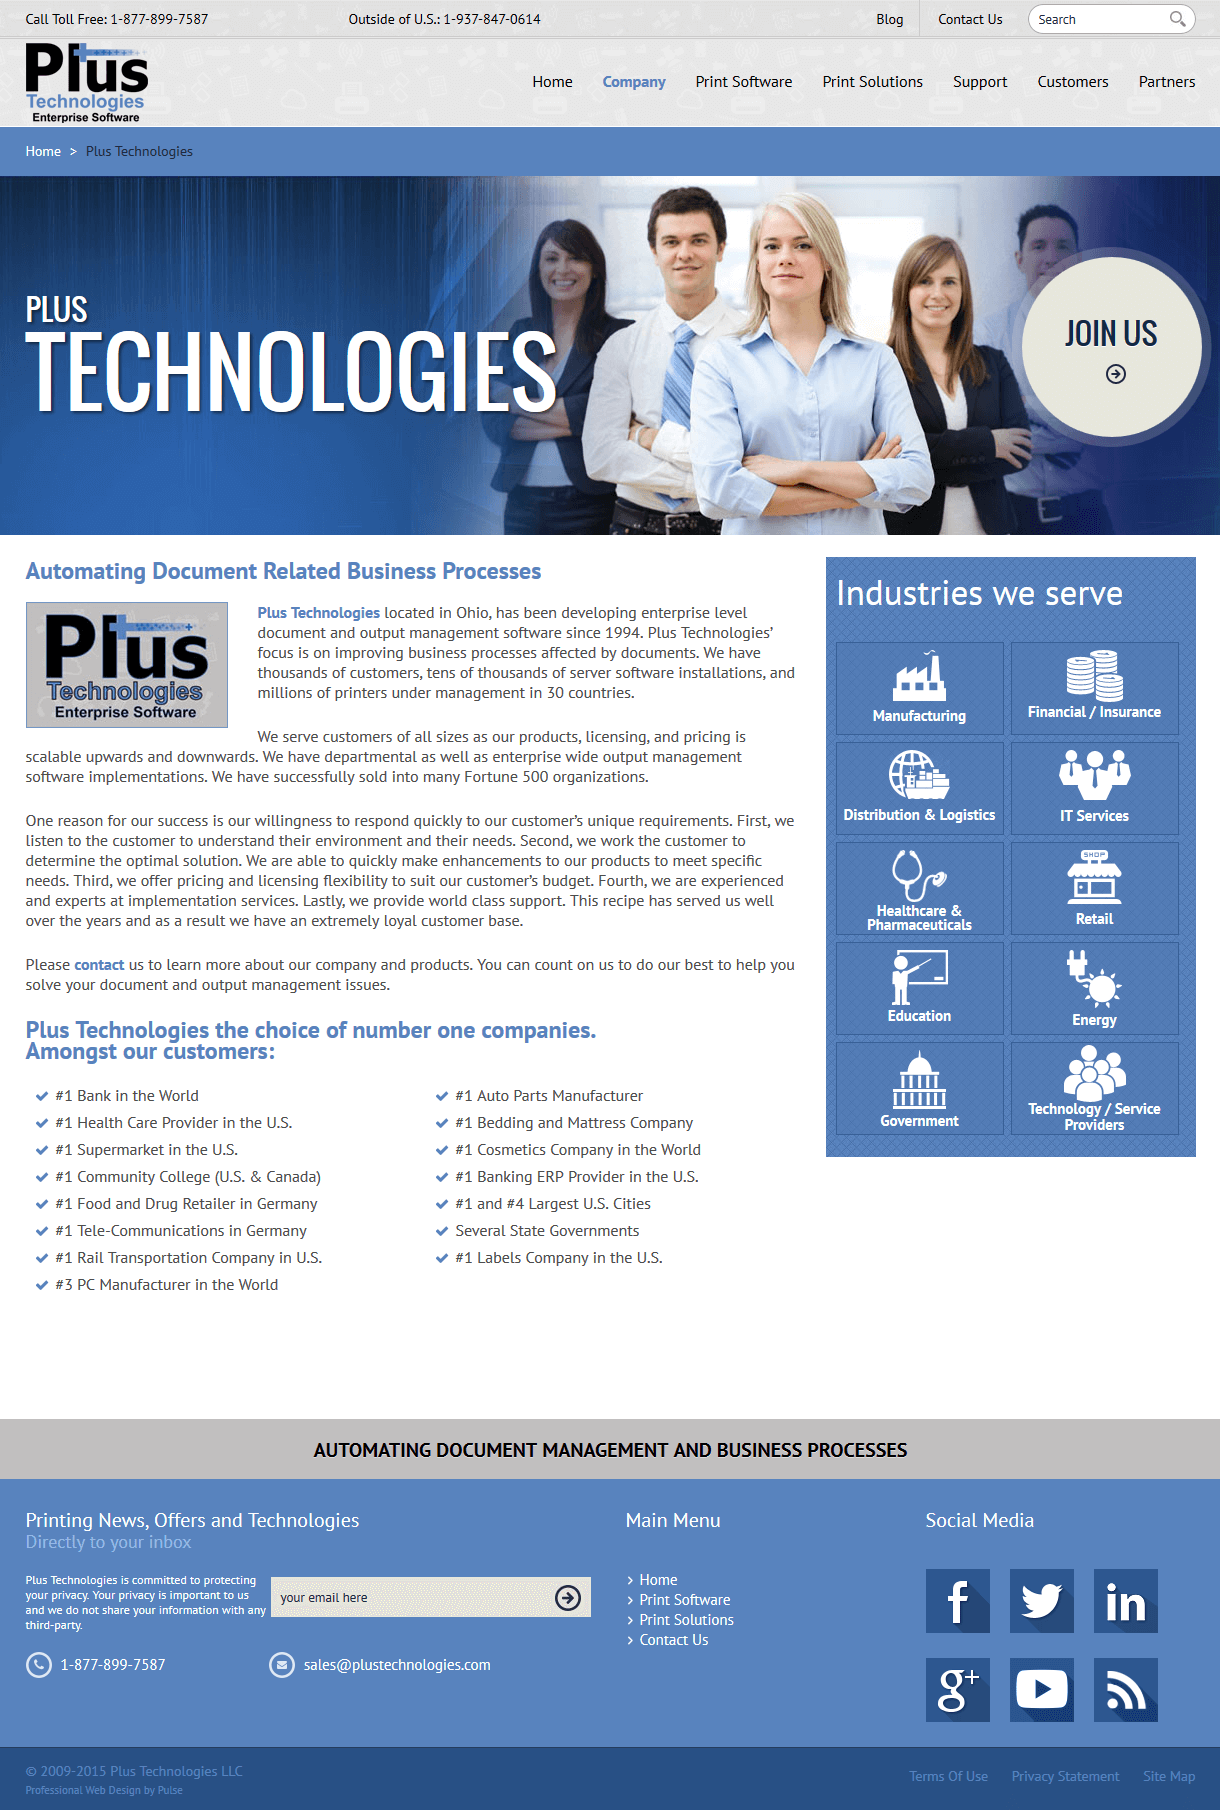 About Plus Technologies